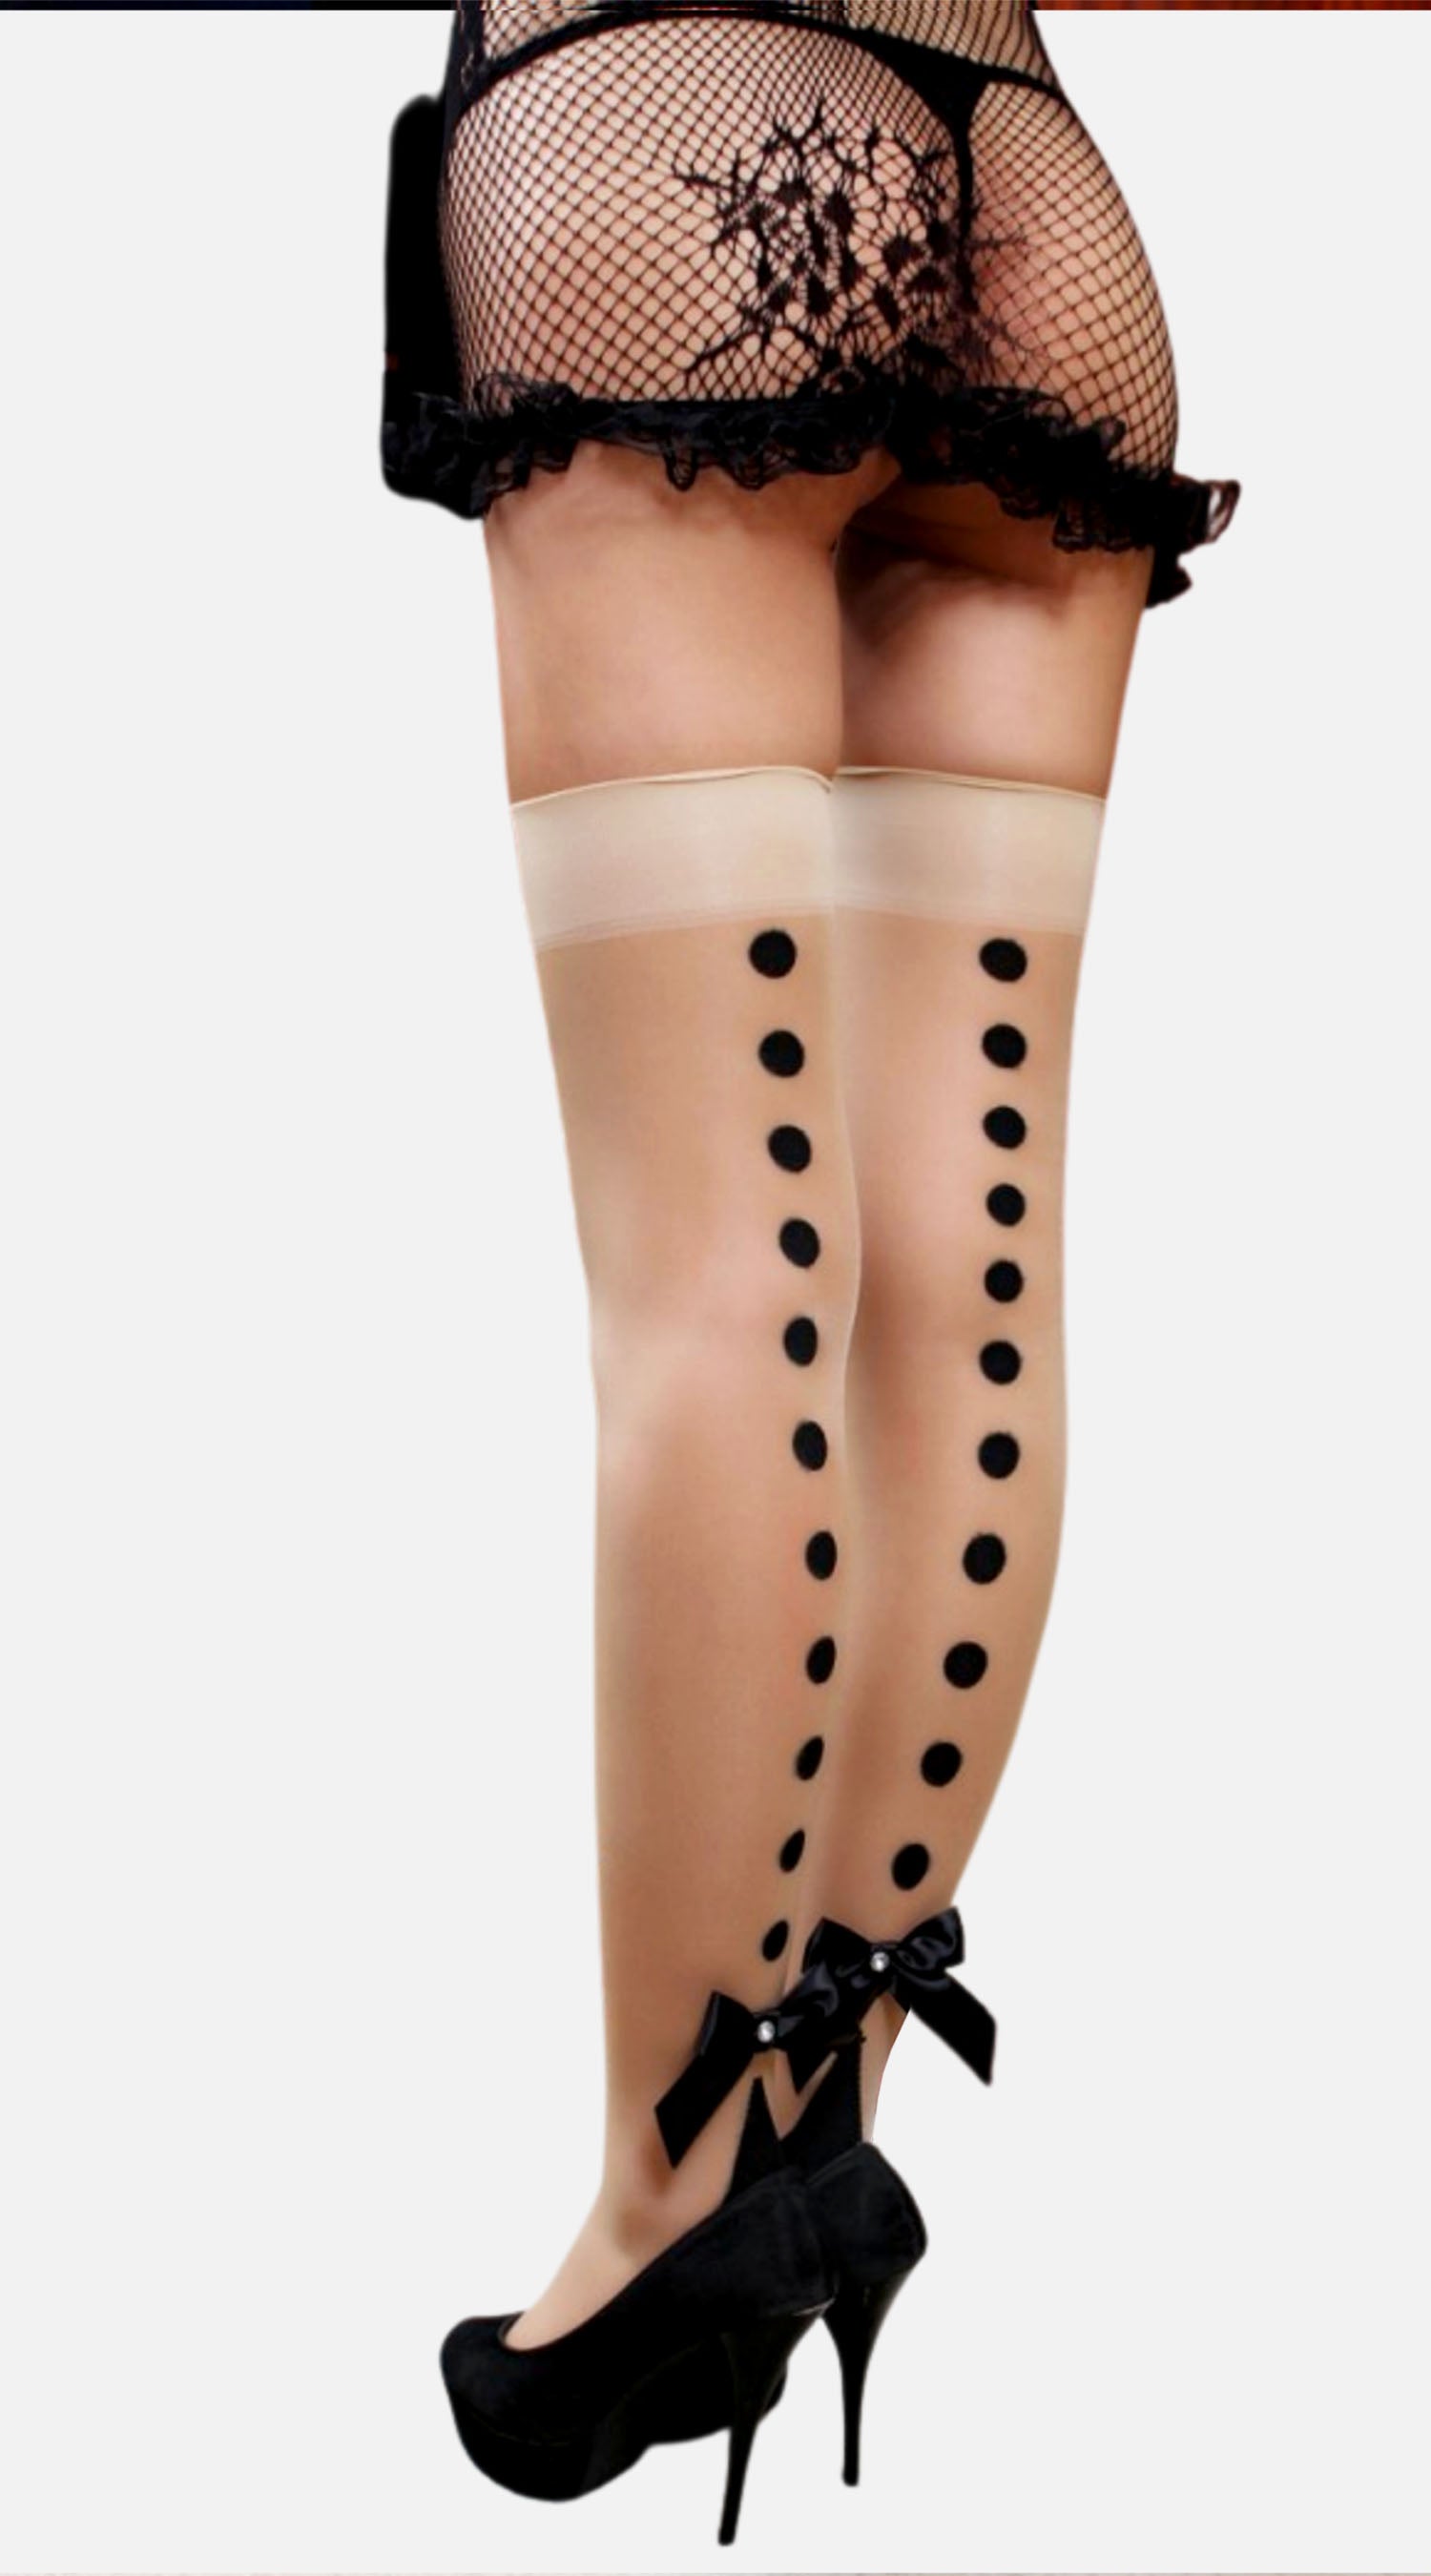 Hold-Ups with Black Polka Dots and Bow - My Voguish